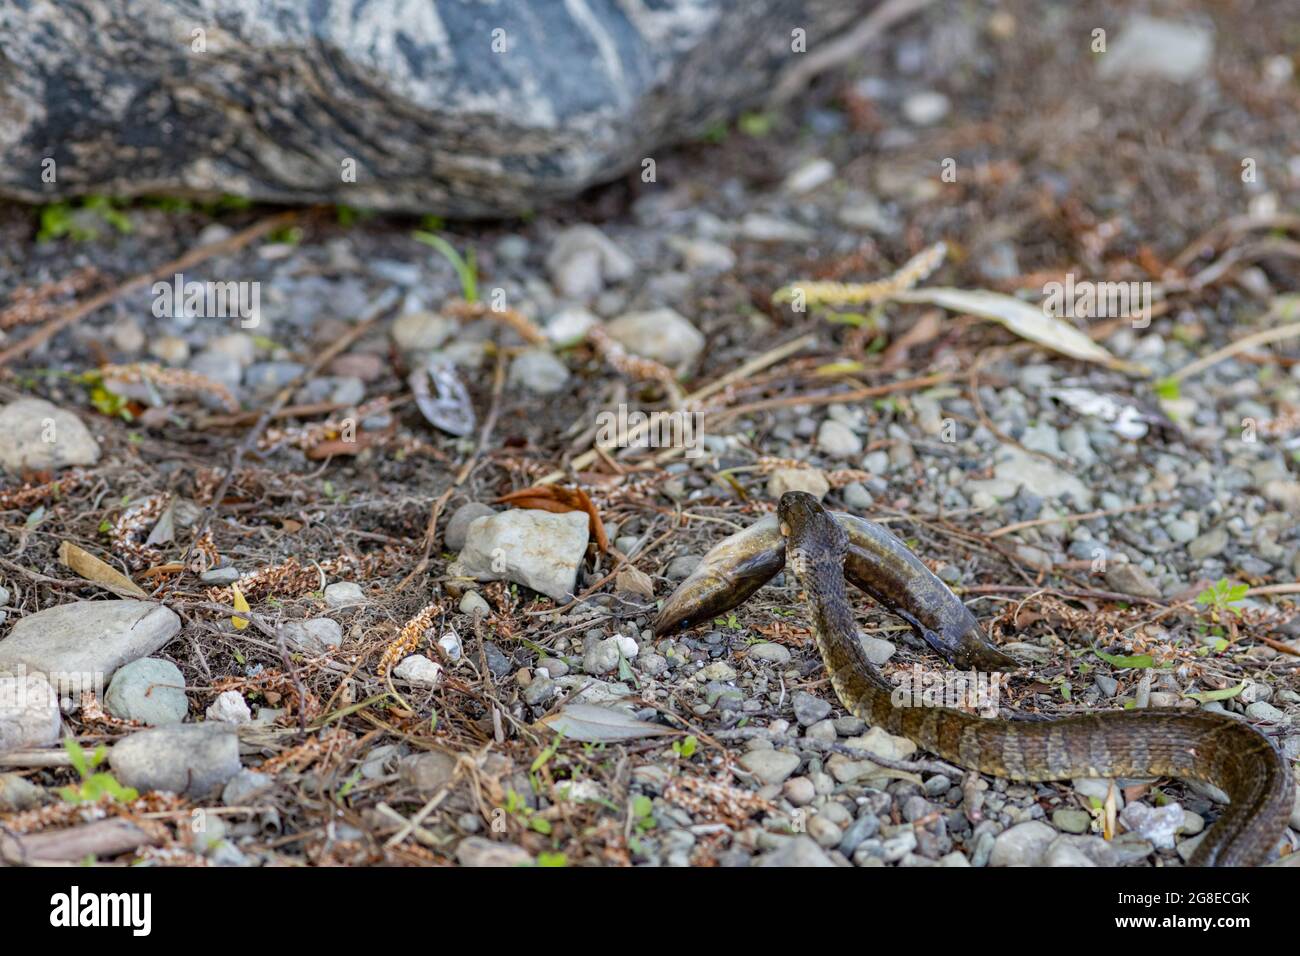 On rocky land, a northern water snake (Nerodia sipedon sipedon) is carrying a dead fish that it caught as it slithers away. Stock Photo